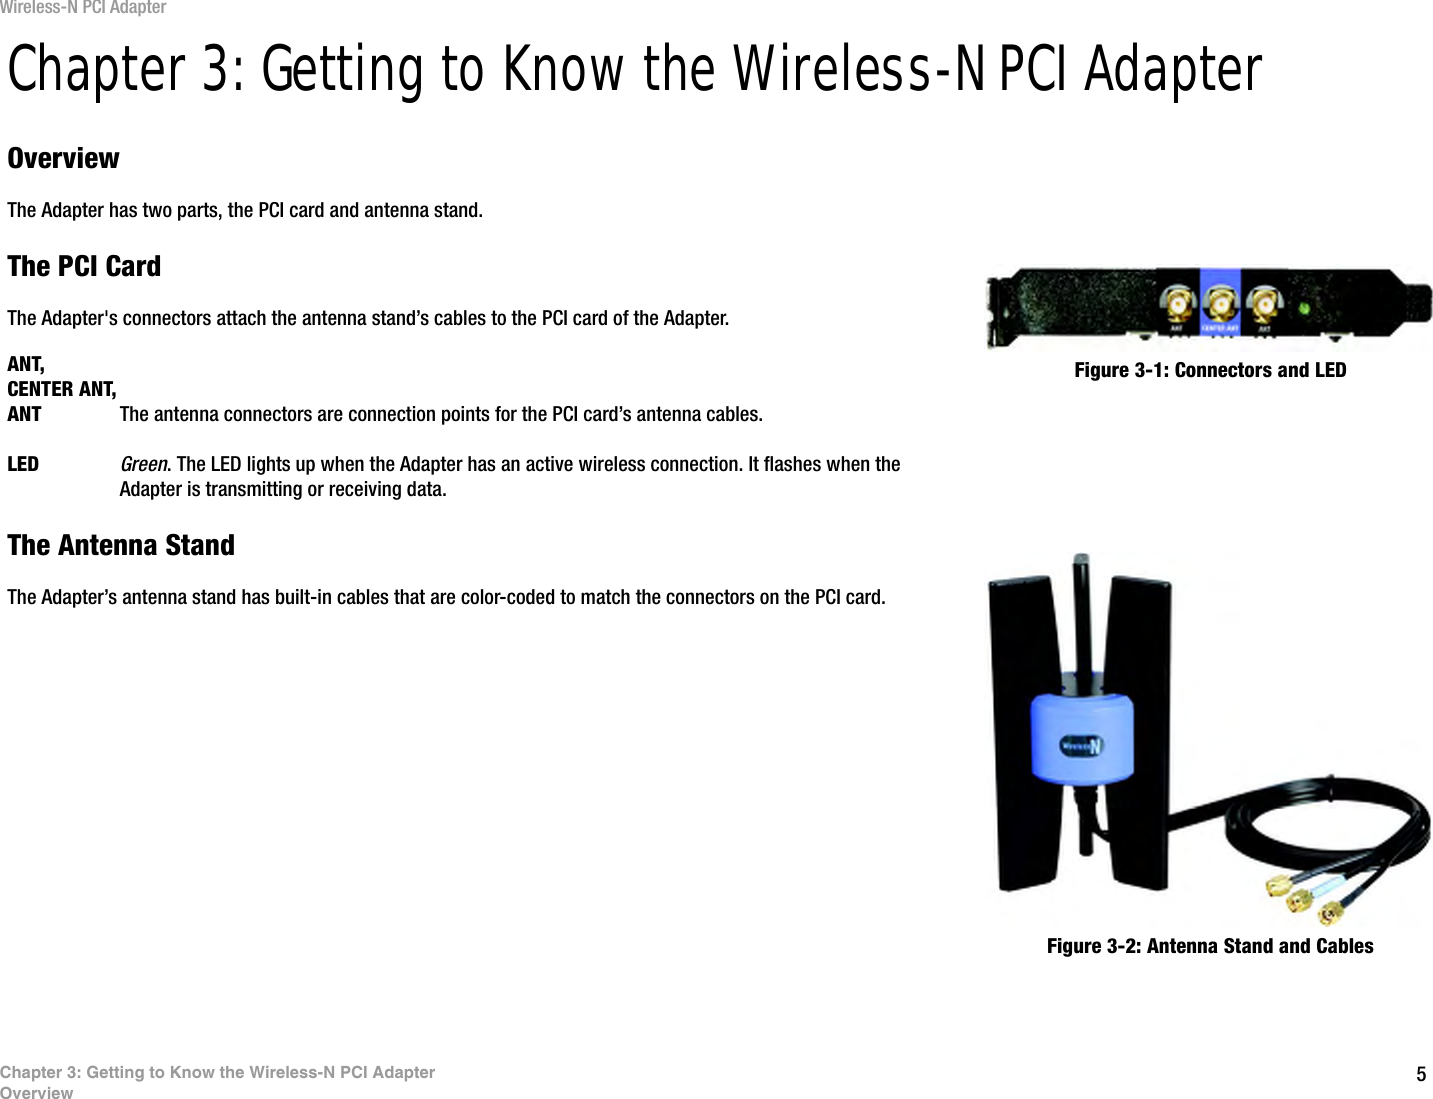 5Chapter 3: Getting to Know the Wireless-N PCI AdapterOverviewWireless-N PCI AdapterChapter 3: Getting to Know the Wireless-N PCI AdapterOverviewThe Adapter has two parts, the PCI card and antenna stand.The PCI CardThe Adapter&apos;s connectors attach the antenna stand’s cables to the PCI card of the Adapter.ANT, CENTER ANT,ANT The antenna connectors are connection points for the PCI card’s antenna cables.LED Green. The LED lights up when the Adapter has an active wireless connection. It flashes when the Adapter is transmitting or receiving data.The Antenna StandThe Adapter’s antenna stand has built-in cables that are color-coded to match the connectors on the PCI card.Figure 3-1: Connectors and LEDFigure 3-2: Antenna Stand and Cables